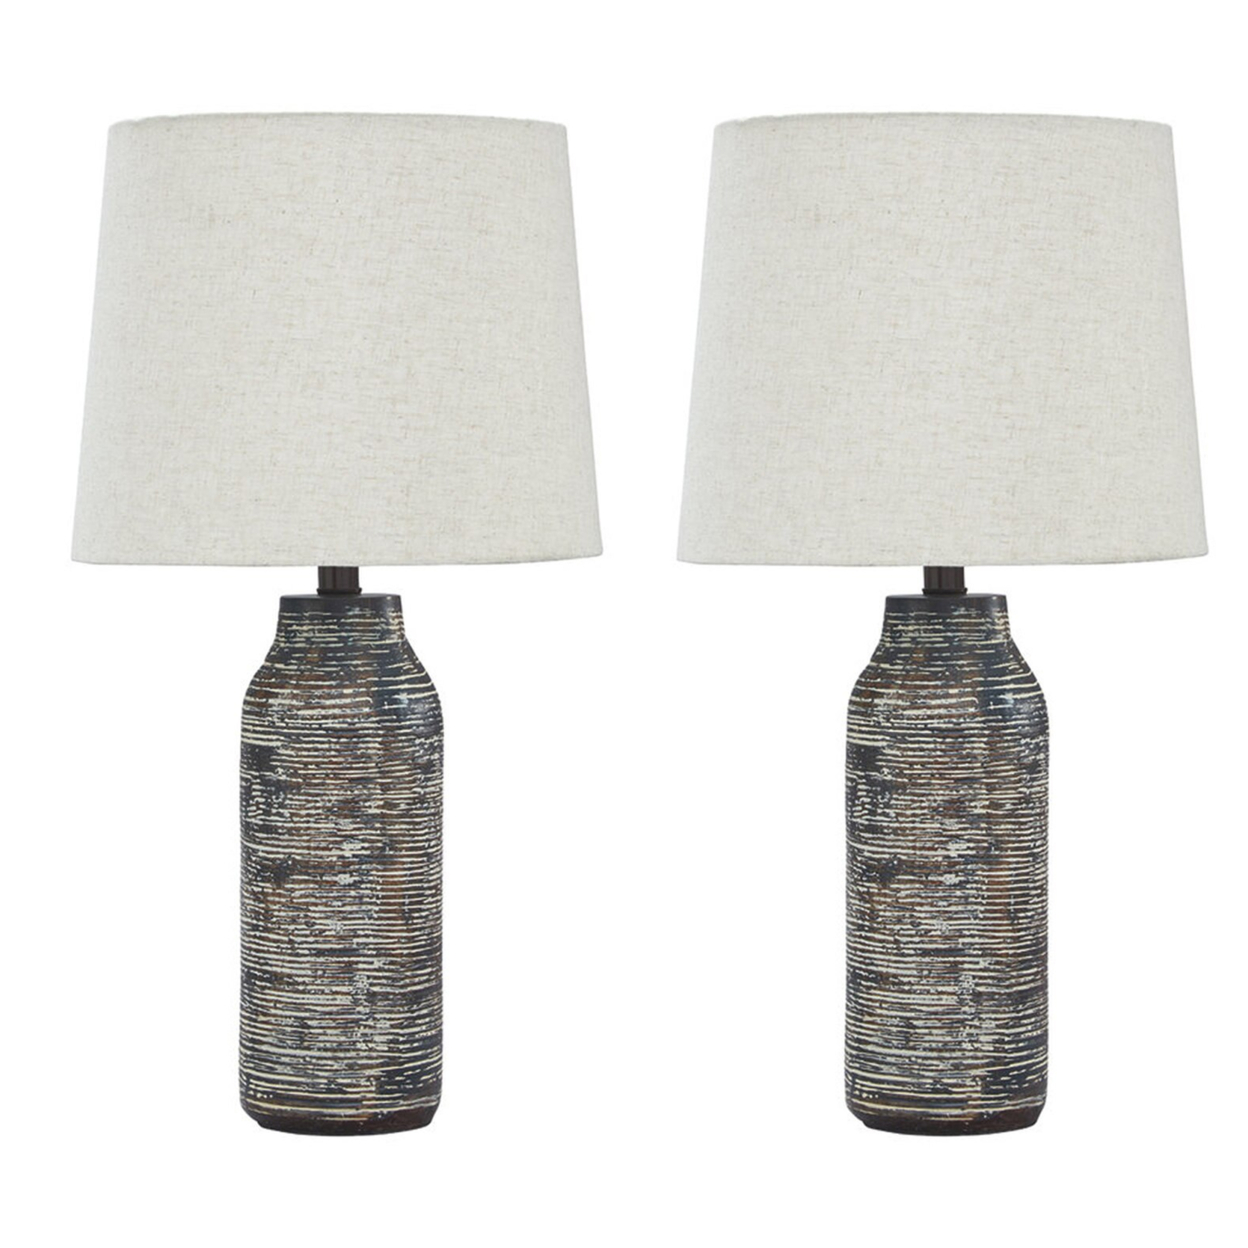 Fabric Shade Table Lamp With Textured Base, Set Of 2, White And Black- Saltoro Sherpi